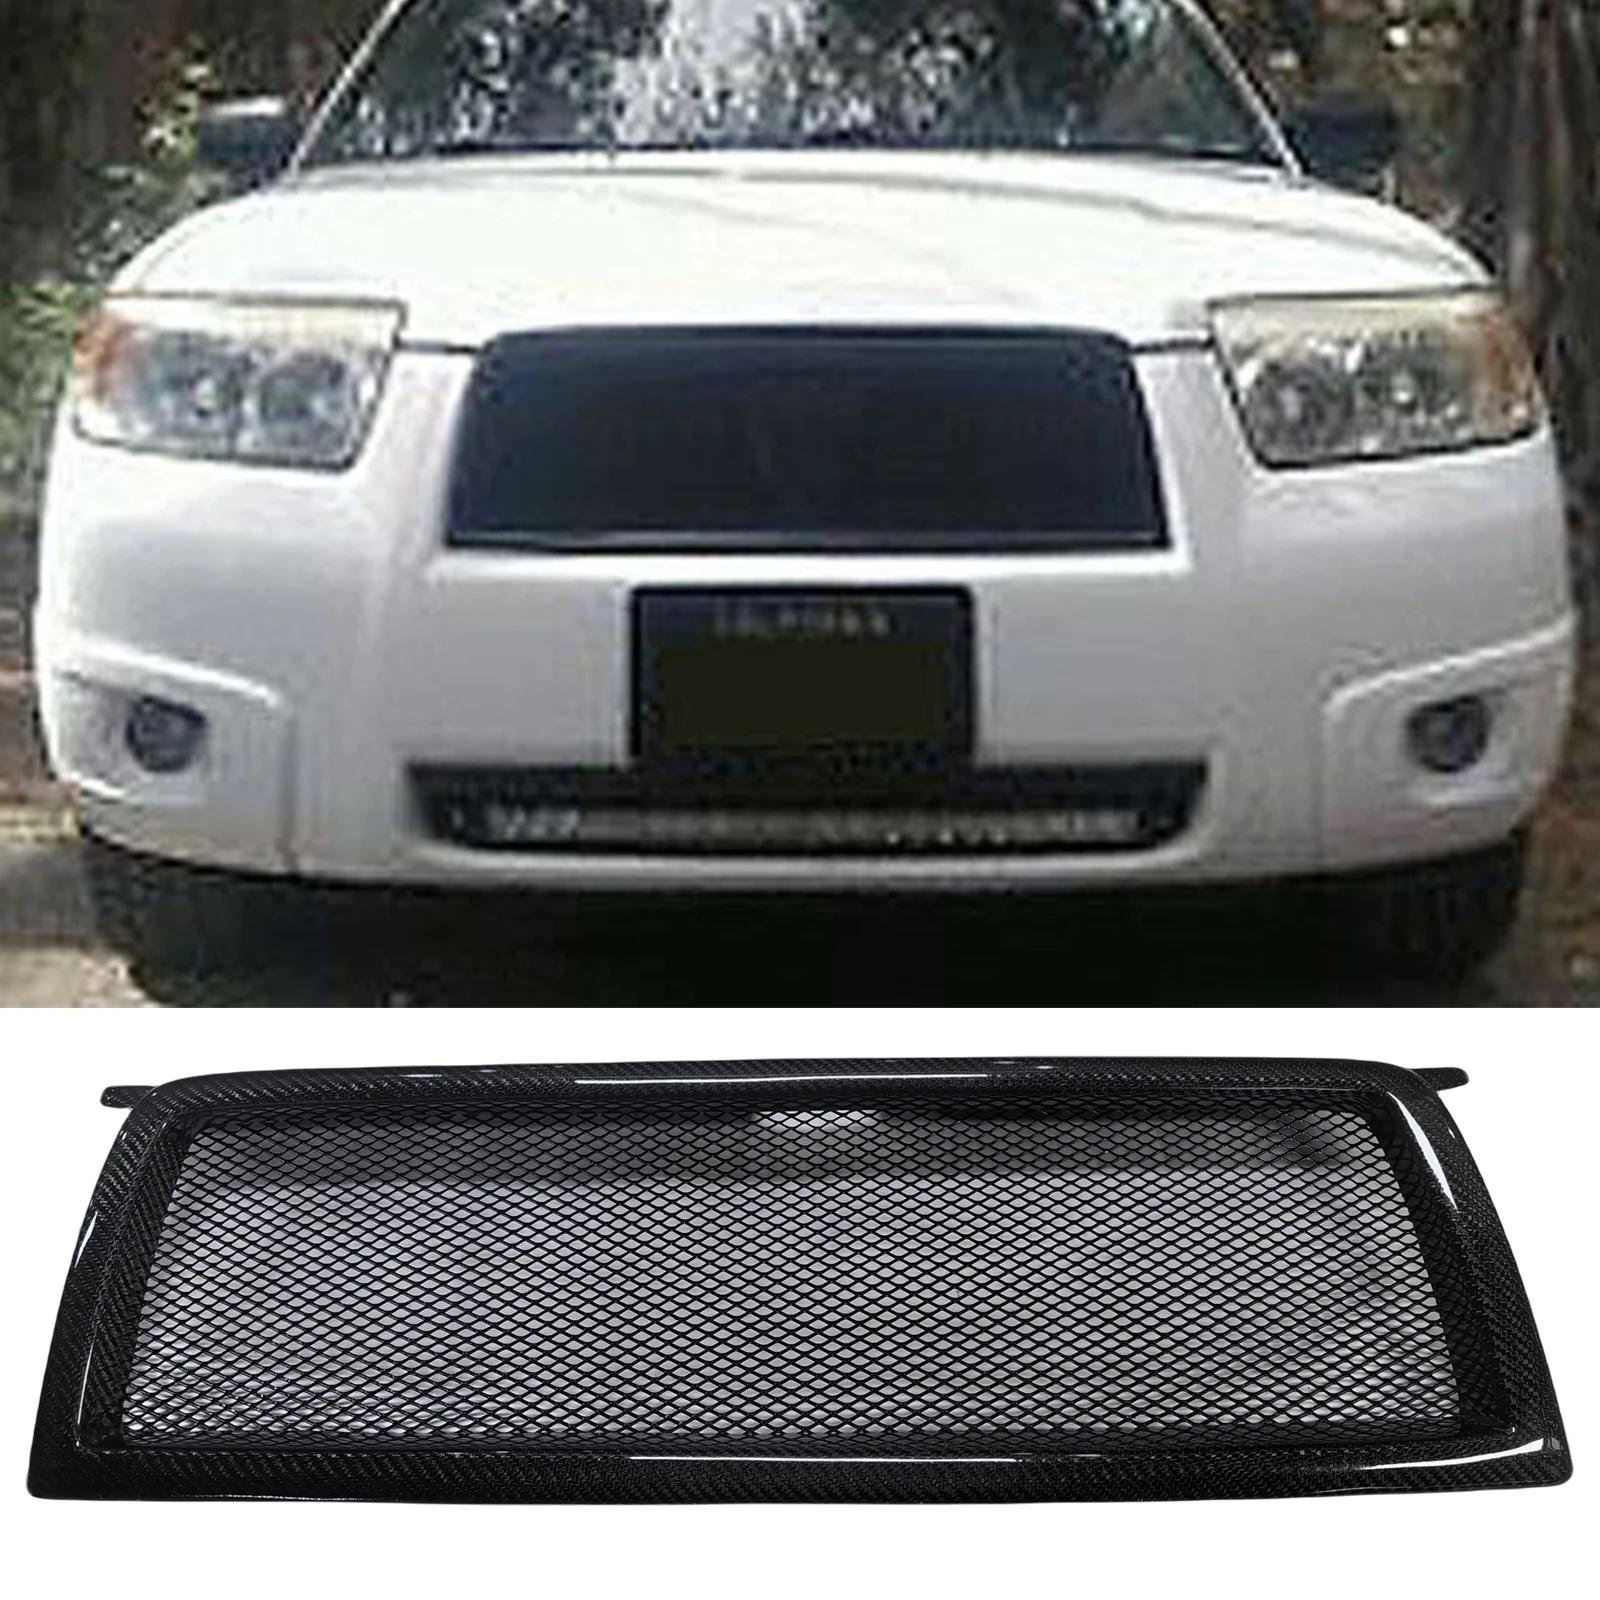 

Front Grille Racing Grill For Subaru Forester 2006 2007 2008 Honeycomb Style Real Carbon Fiber/Fiberglass Upper Bumper Hood Mesh